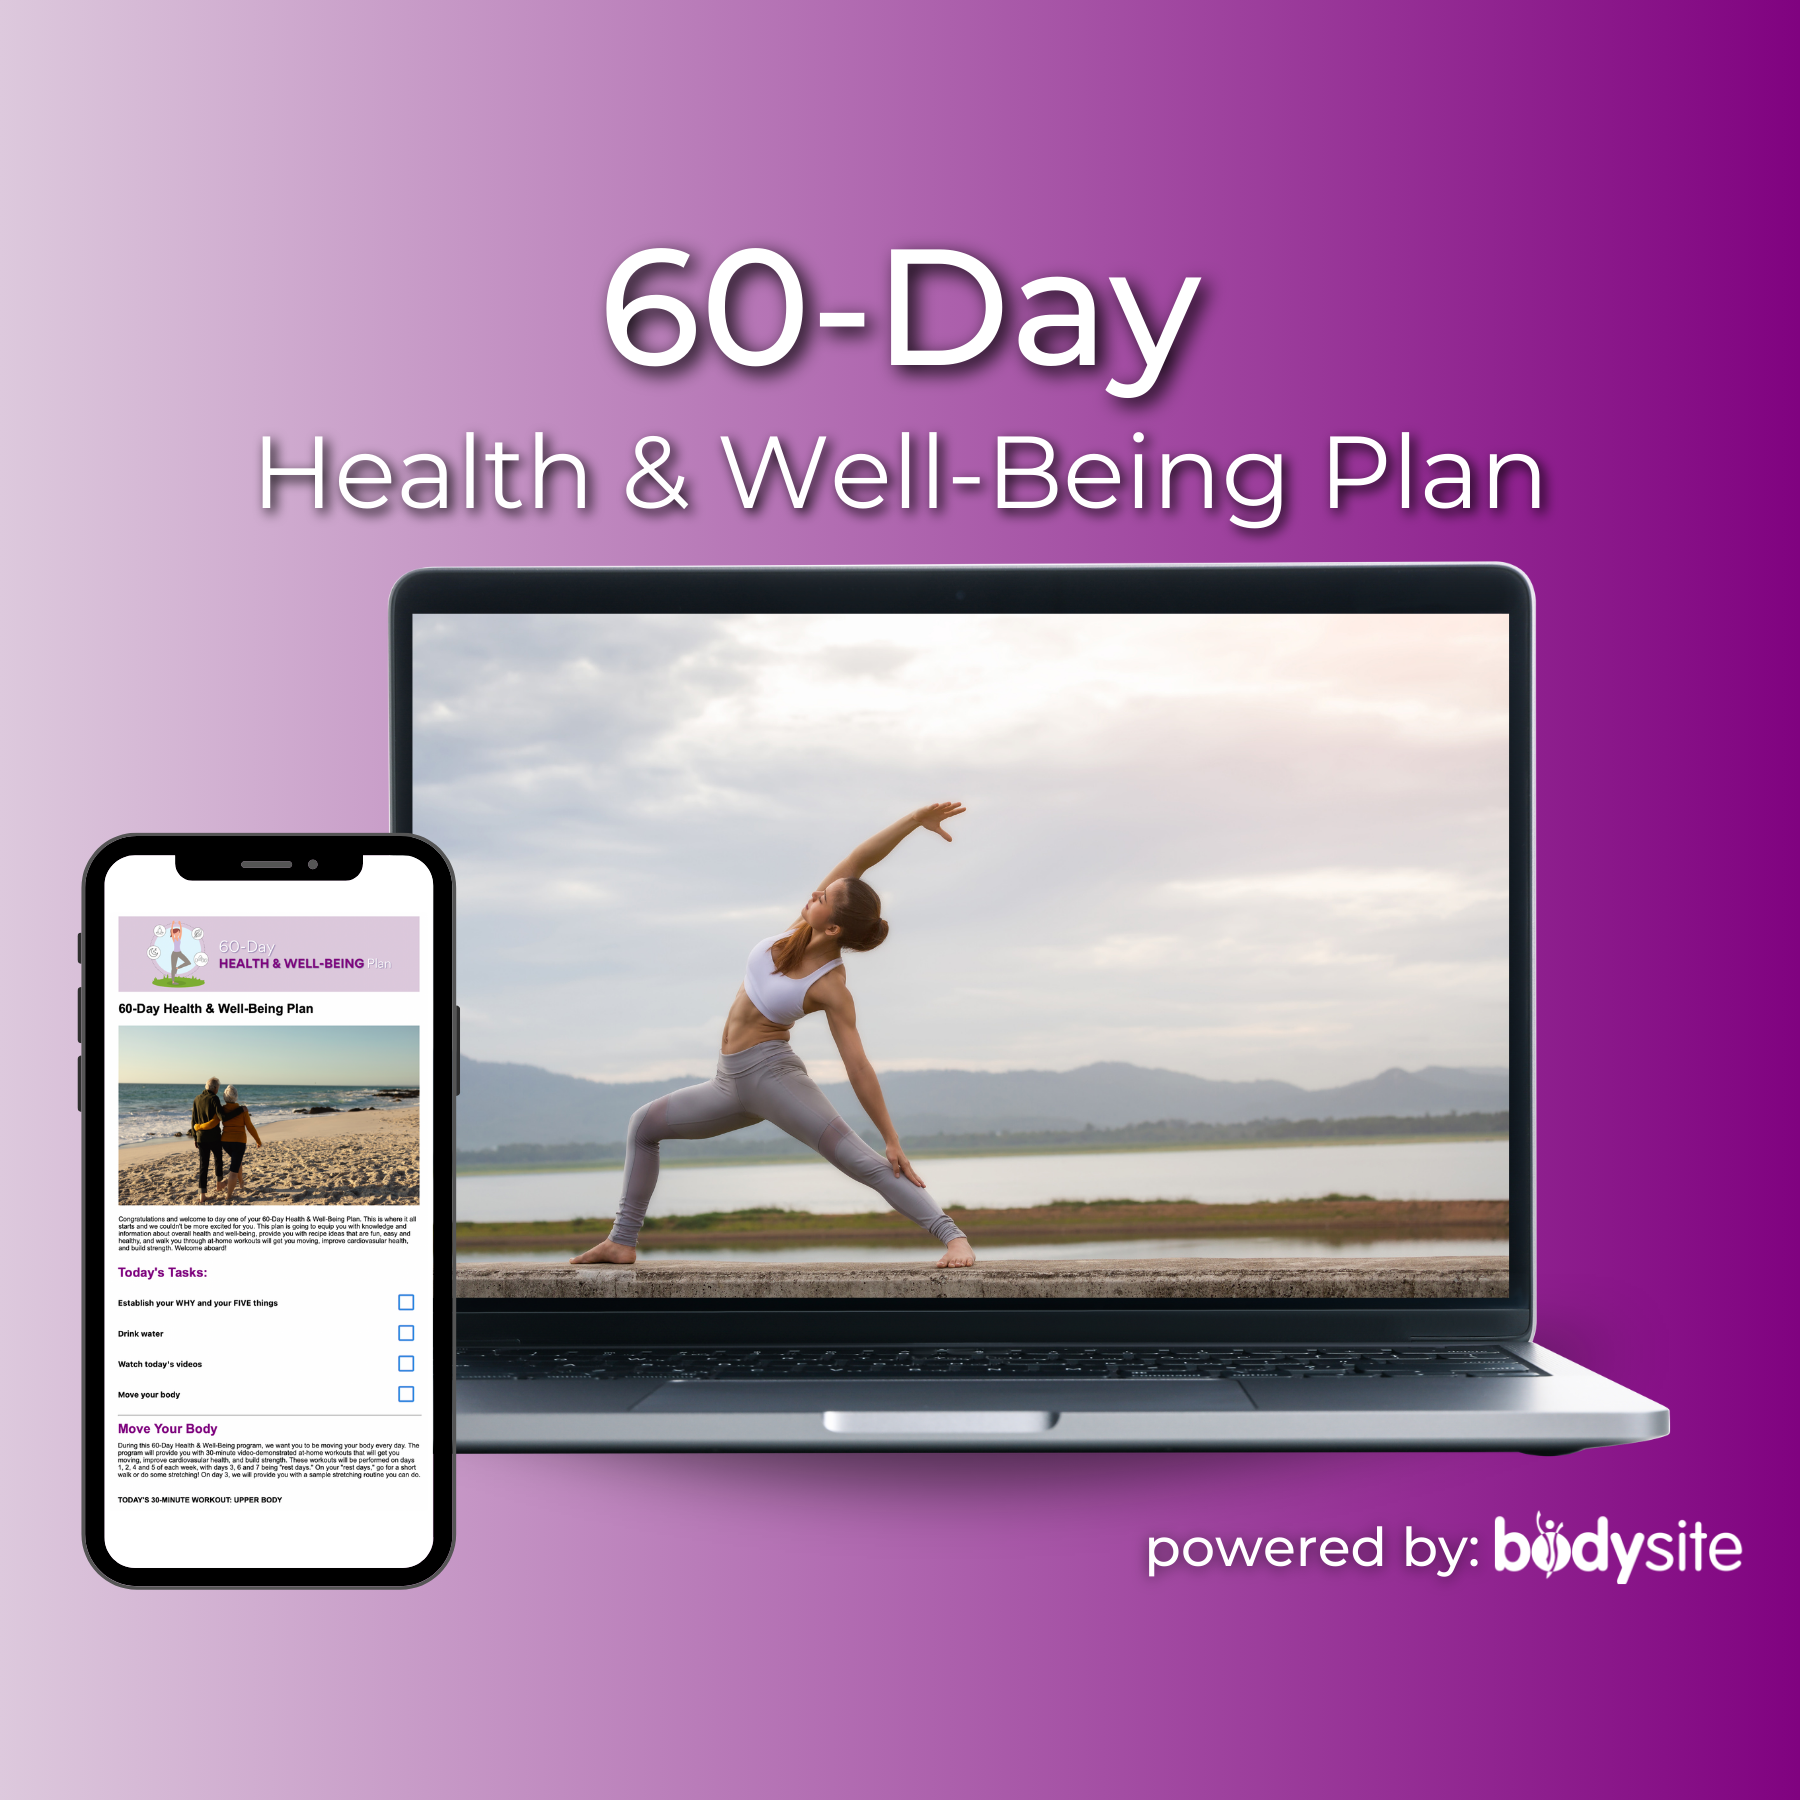 Interactive-Patient-Education-60-Day-Health-Wellbeing-Plan-on-BodySite